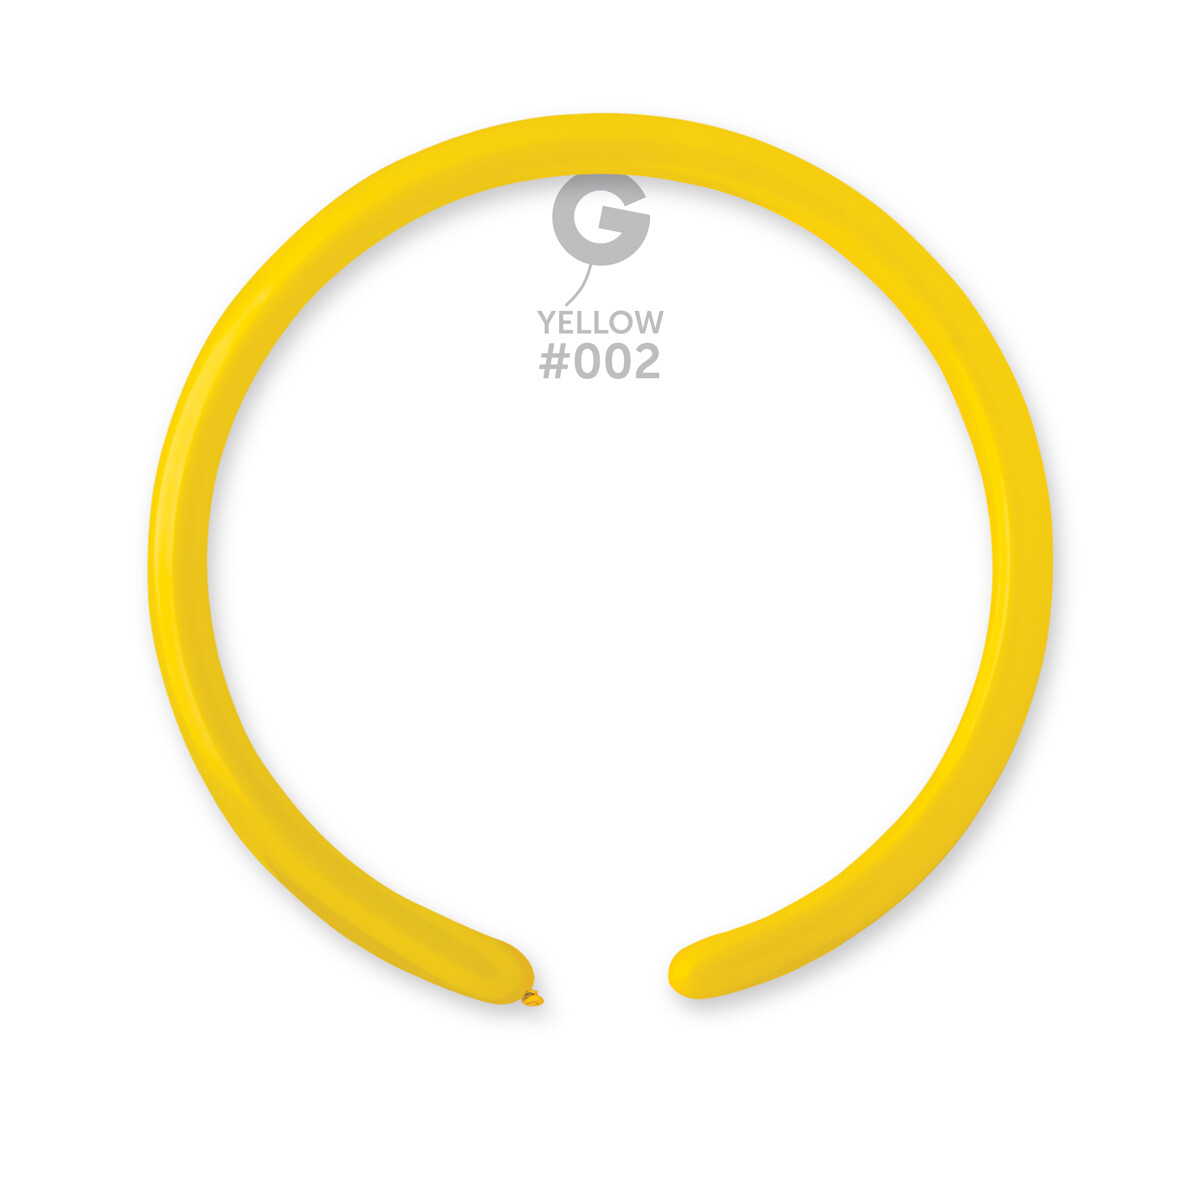 Standard Yellow #002 1in - 50 pieces